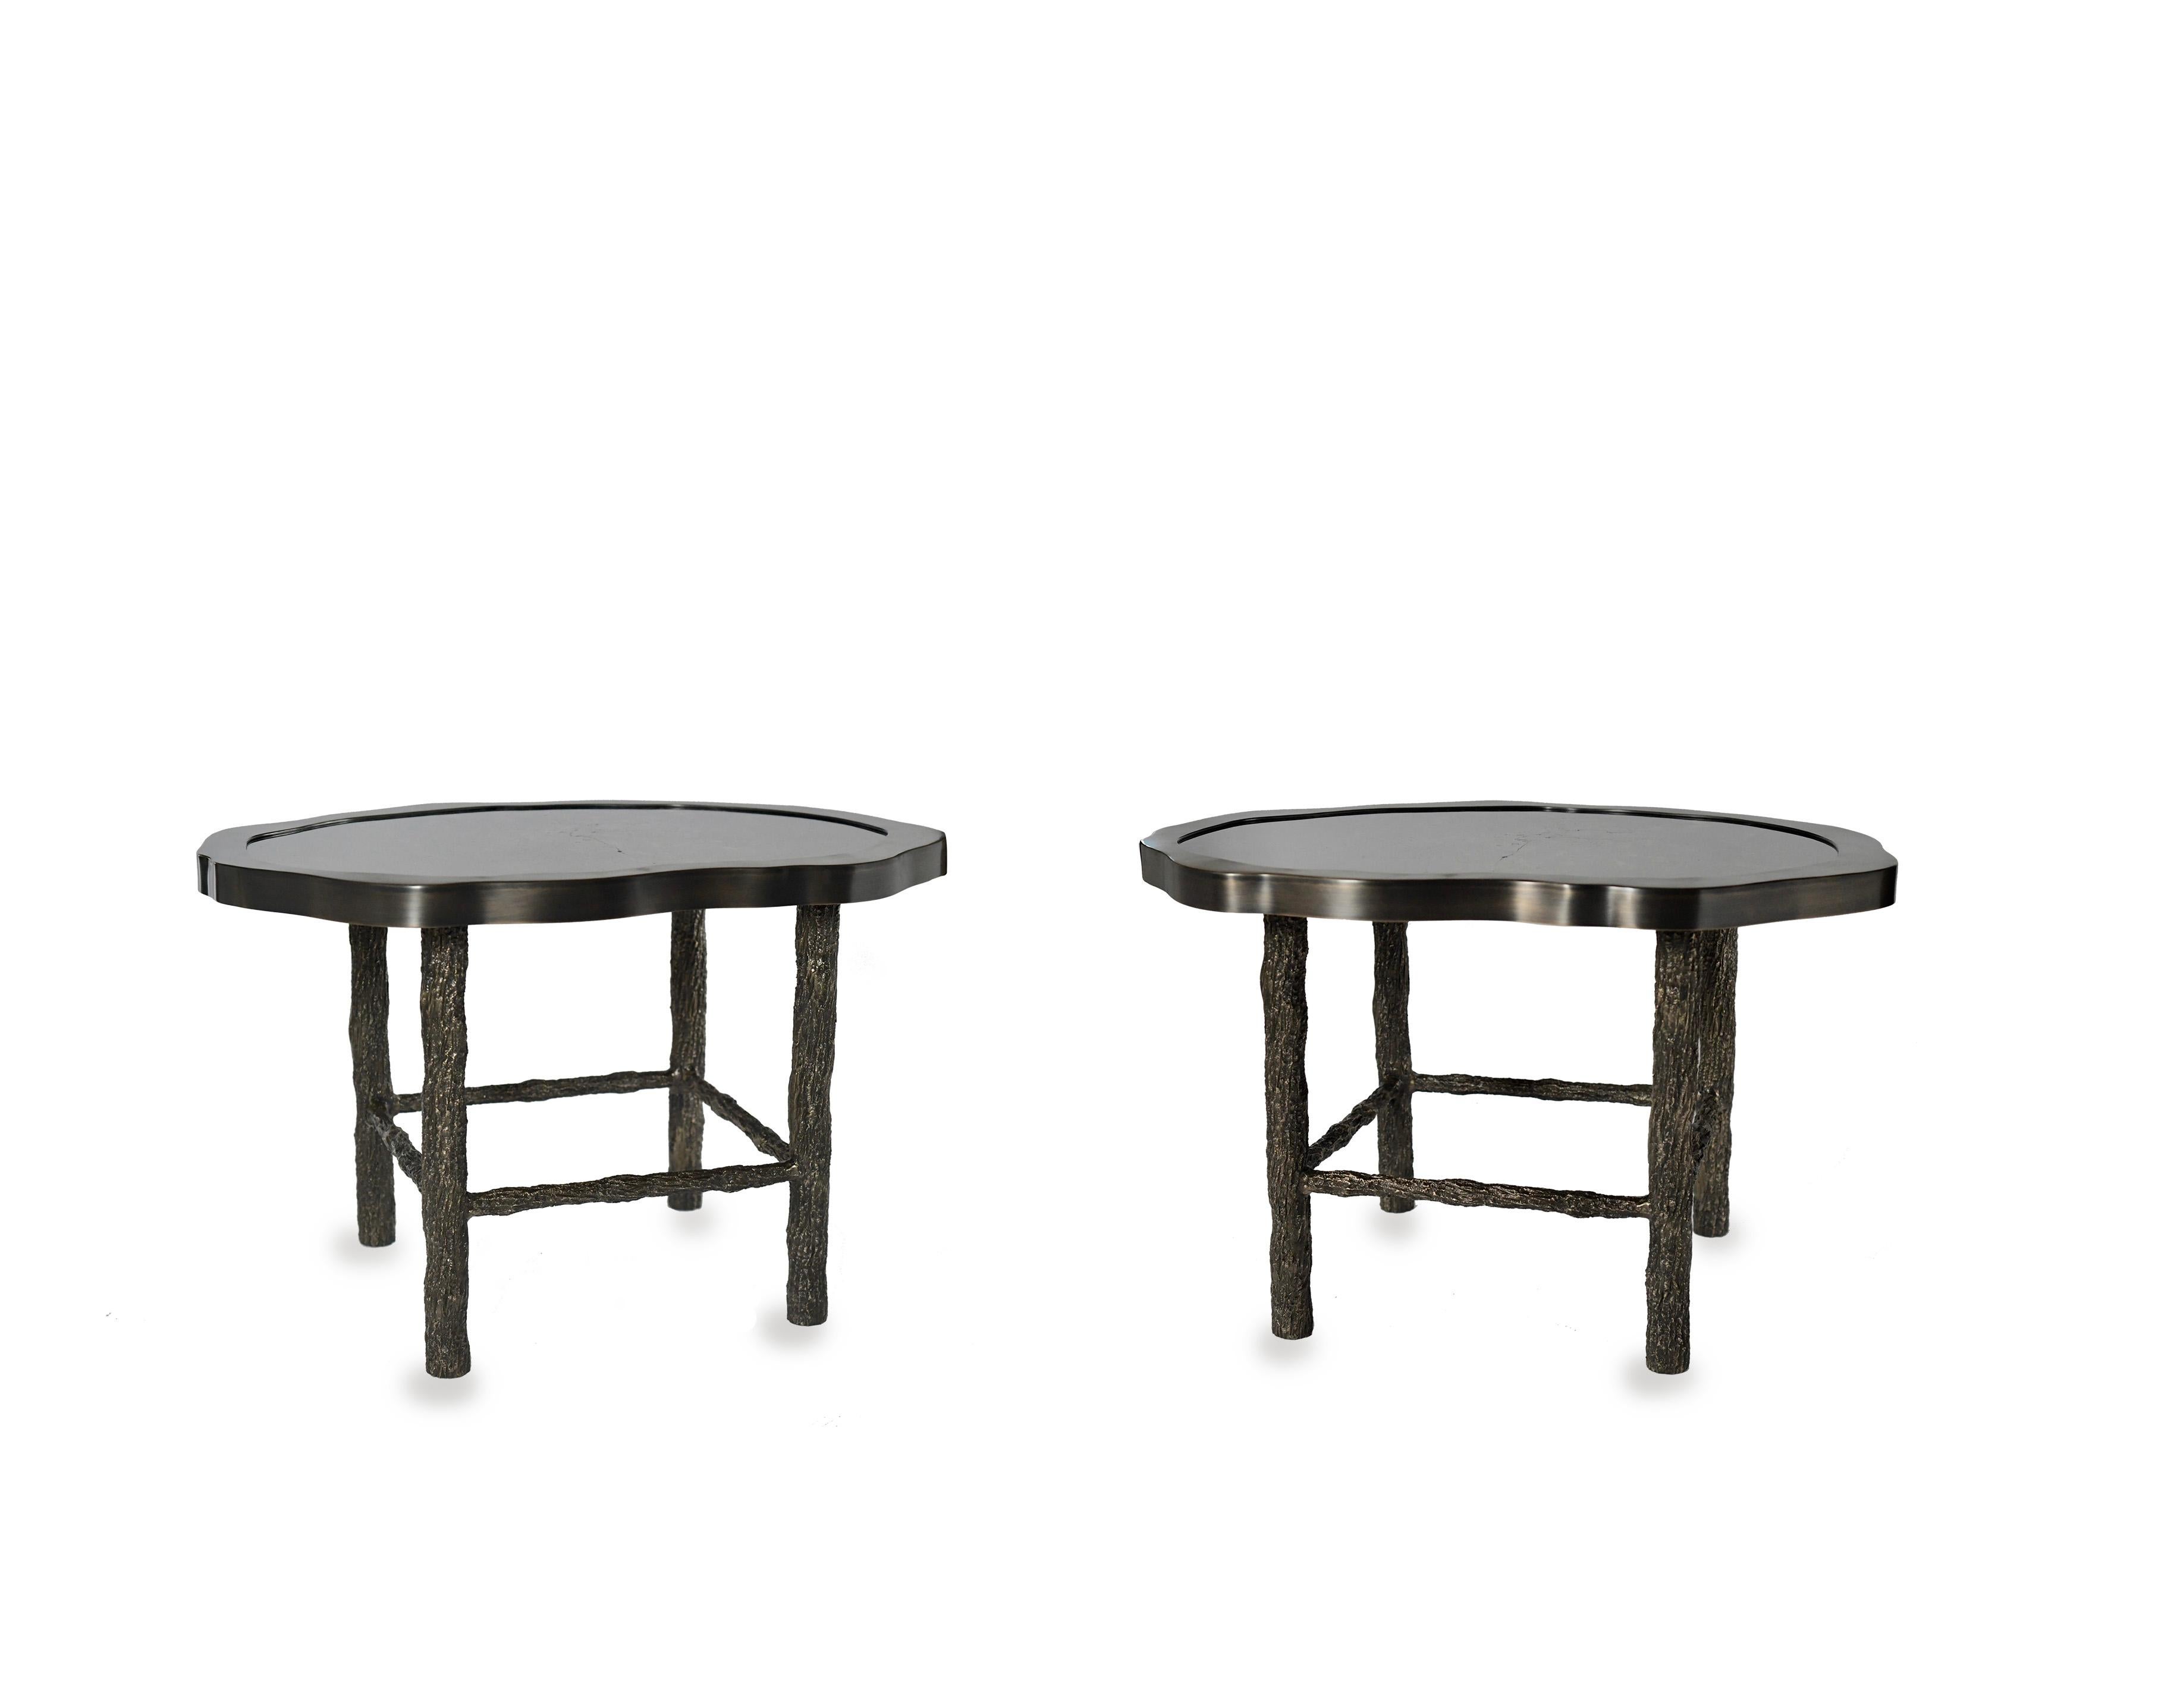 Pair of smoky dark rock crystal quartz cocktail tables with twig inspired antique brass legs, created by Phoenix Gallery.
Can be sold by separated.
Custom size upon request